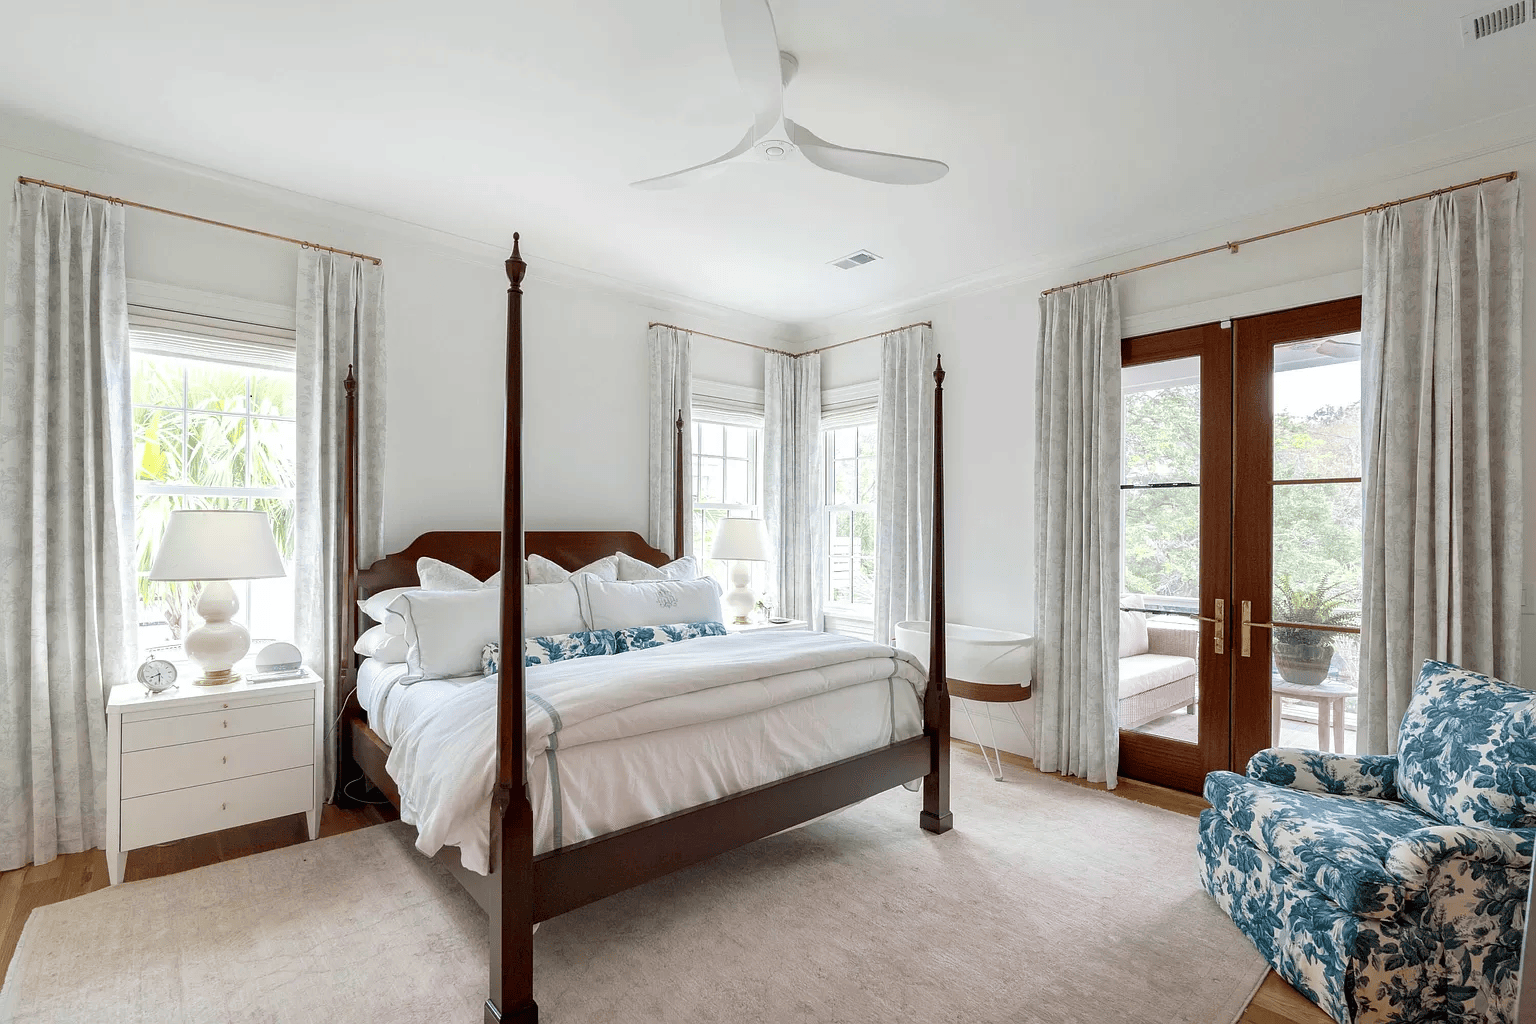 Traditional bedroom featured in Charleston Harbor home tour 